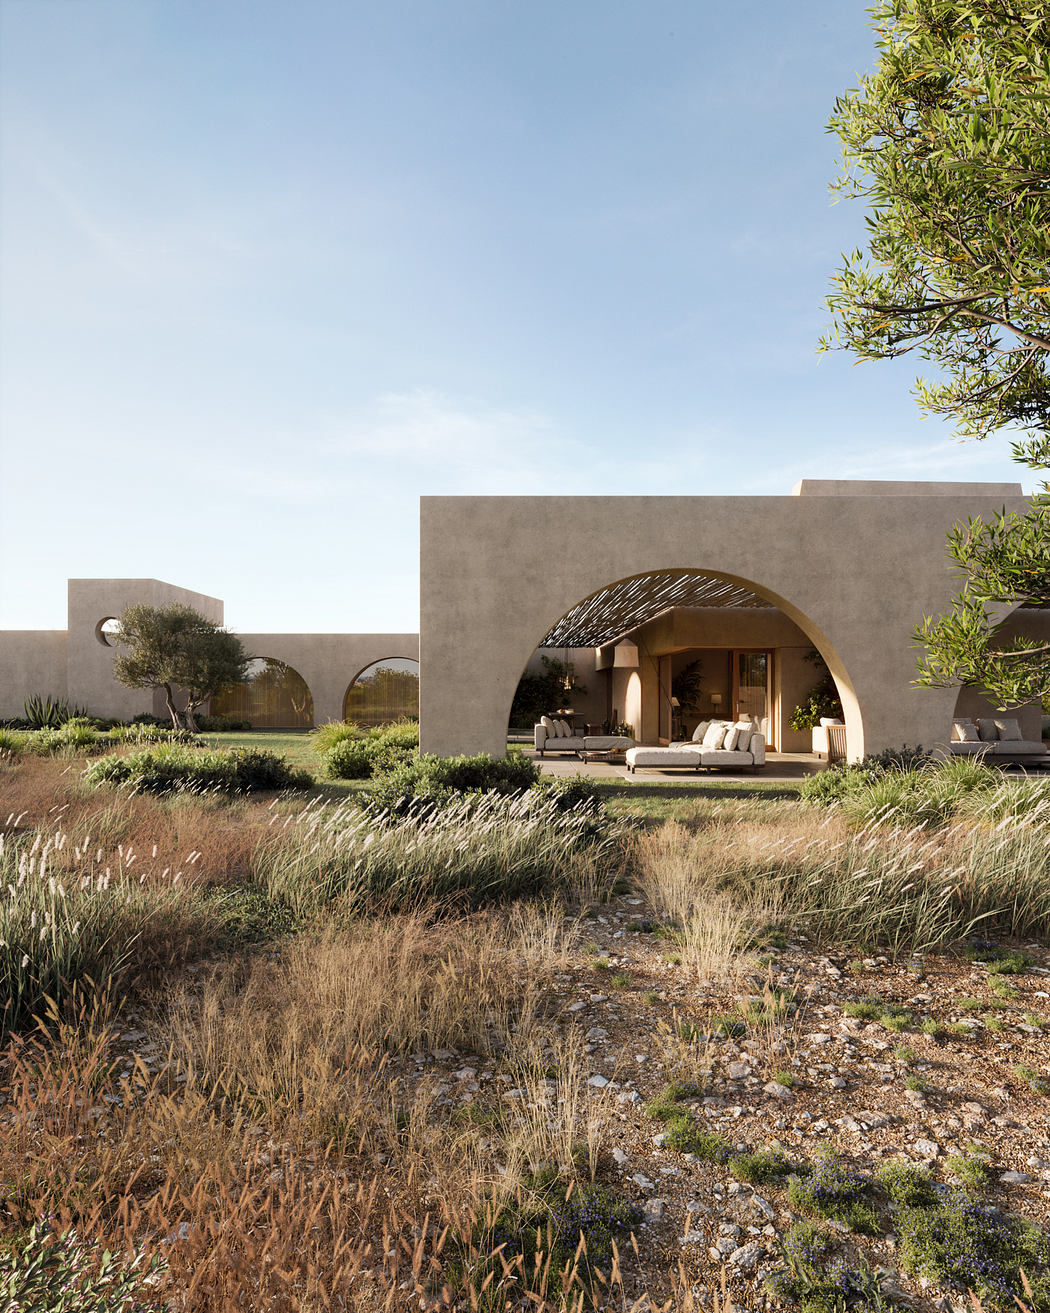 Contemporary villa with arched entrance set amidst wild grass.